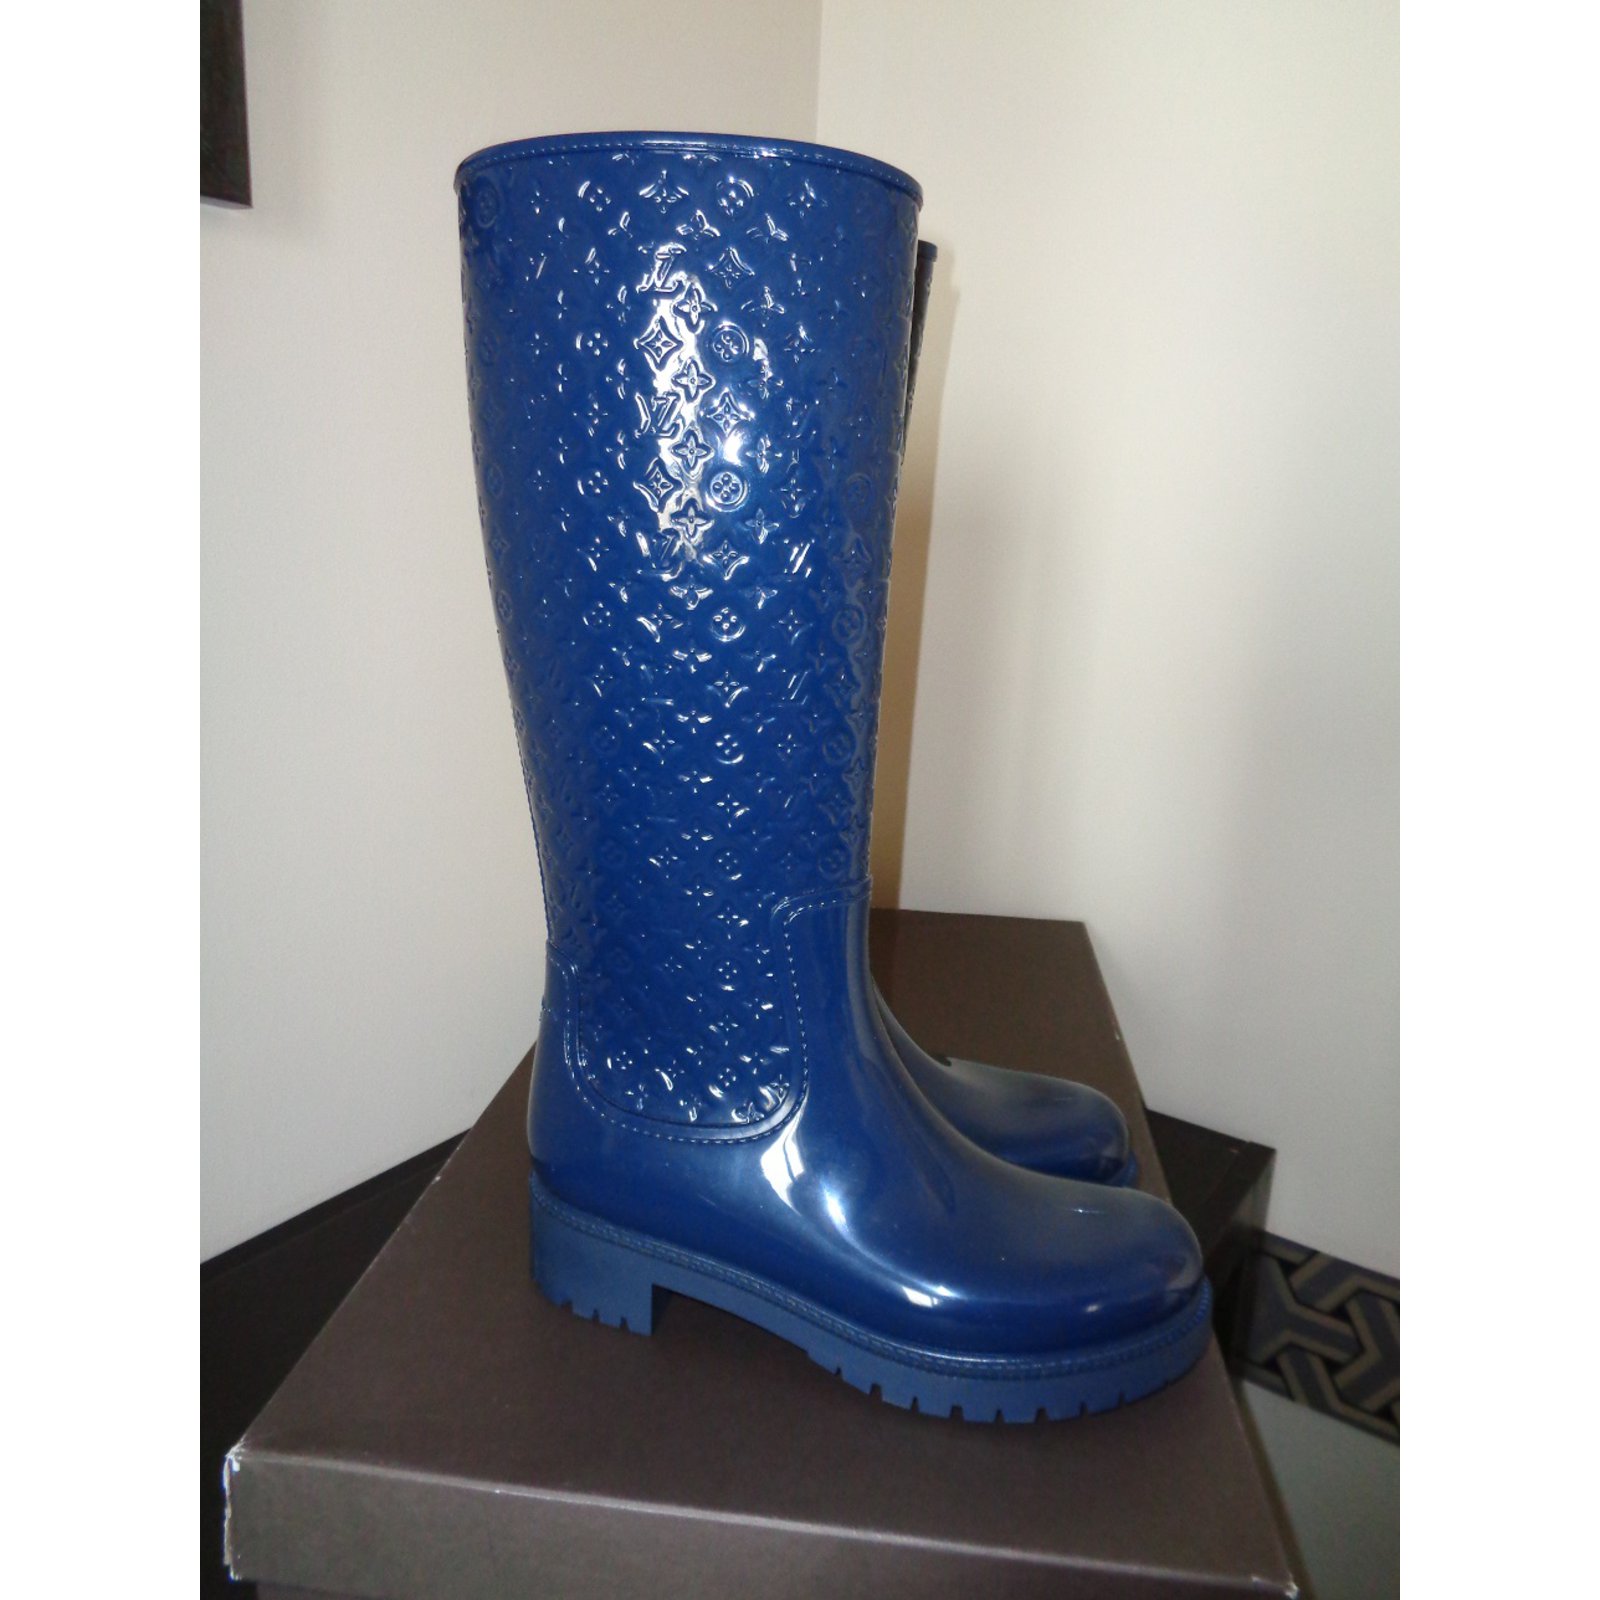 louis vuitton welly boots